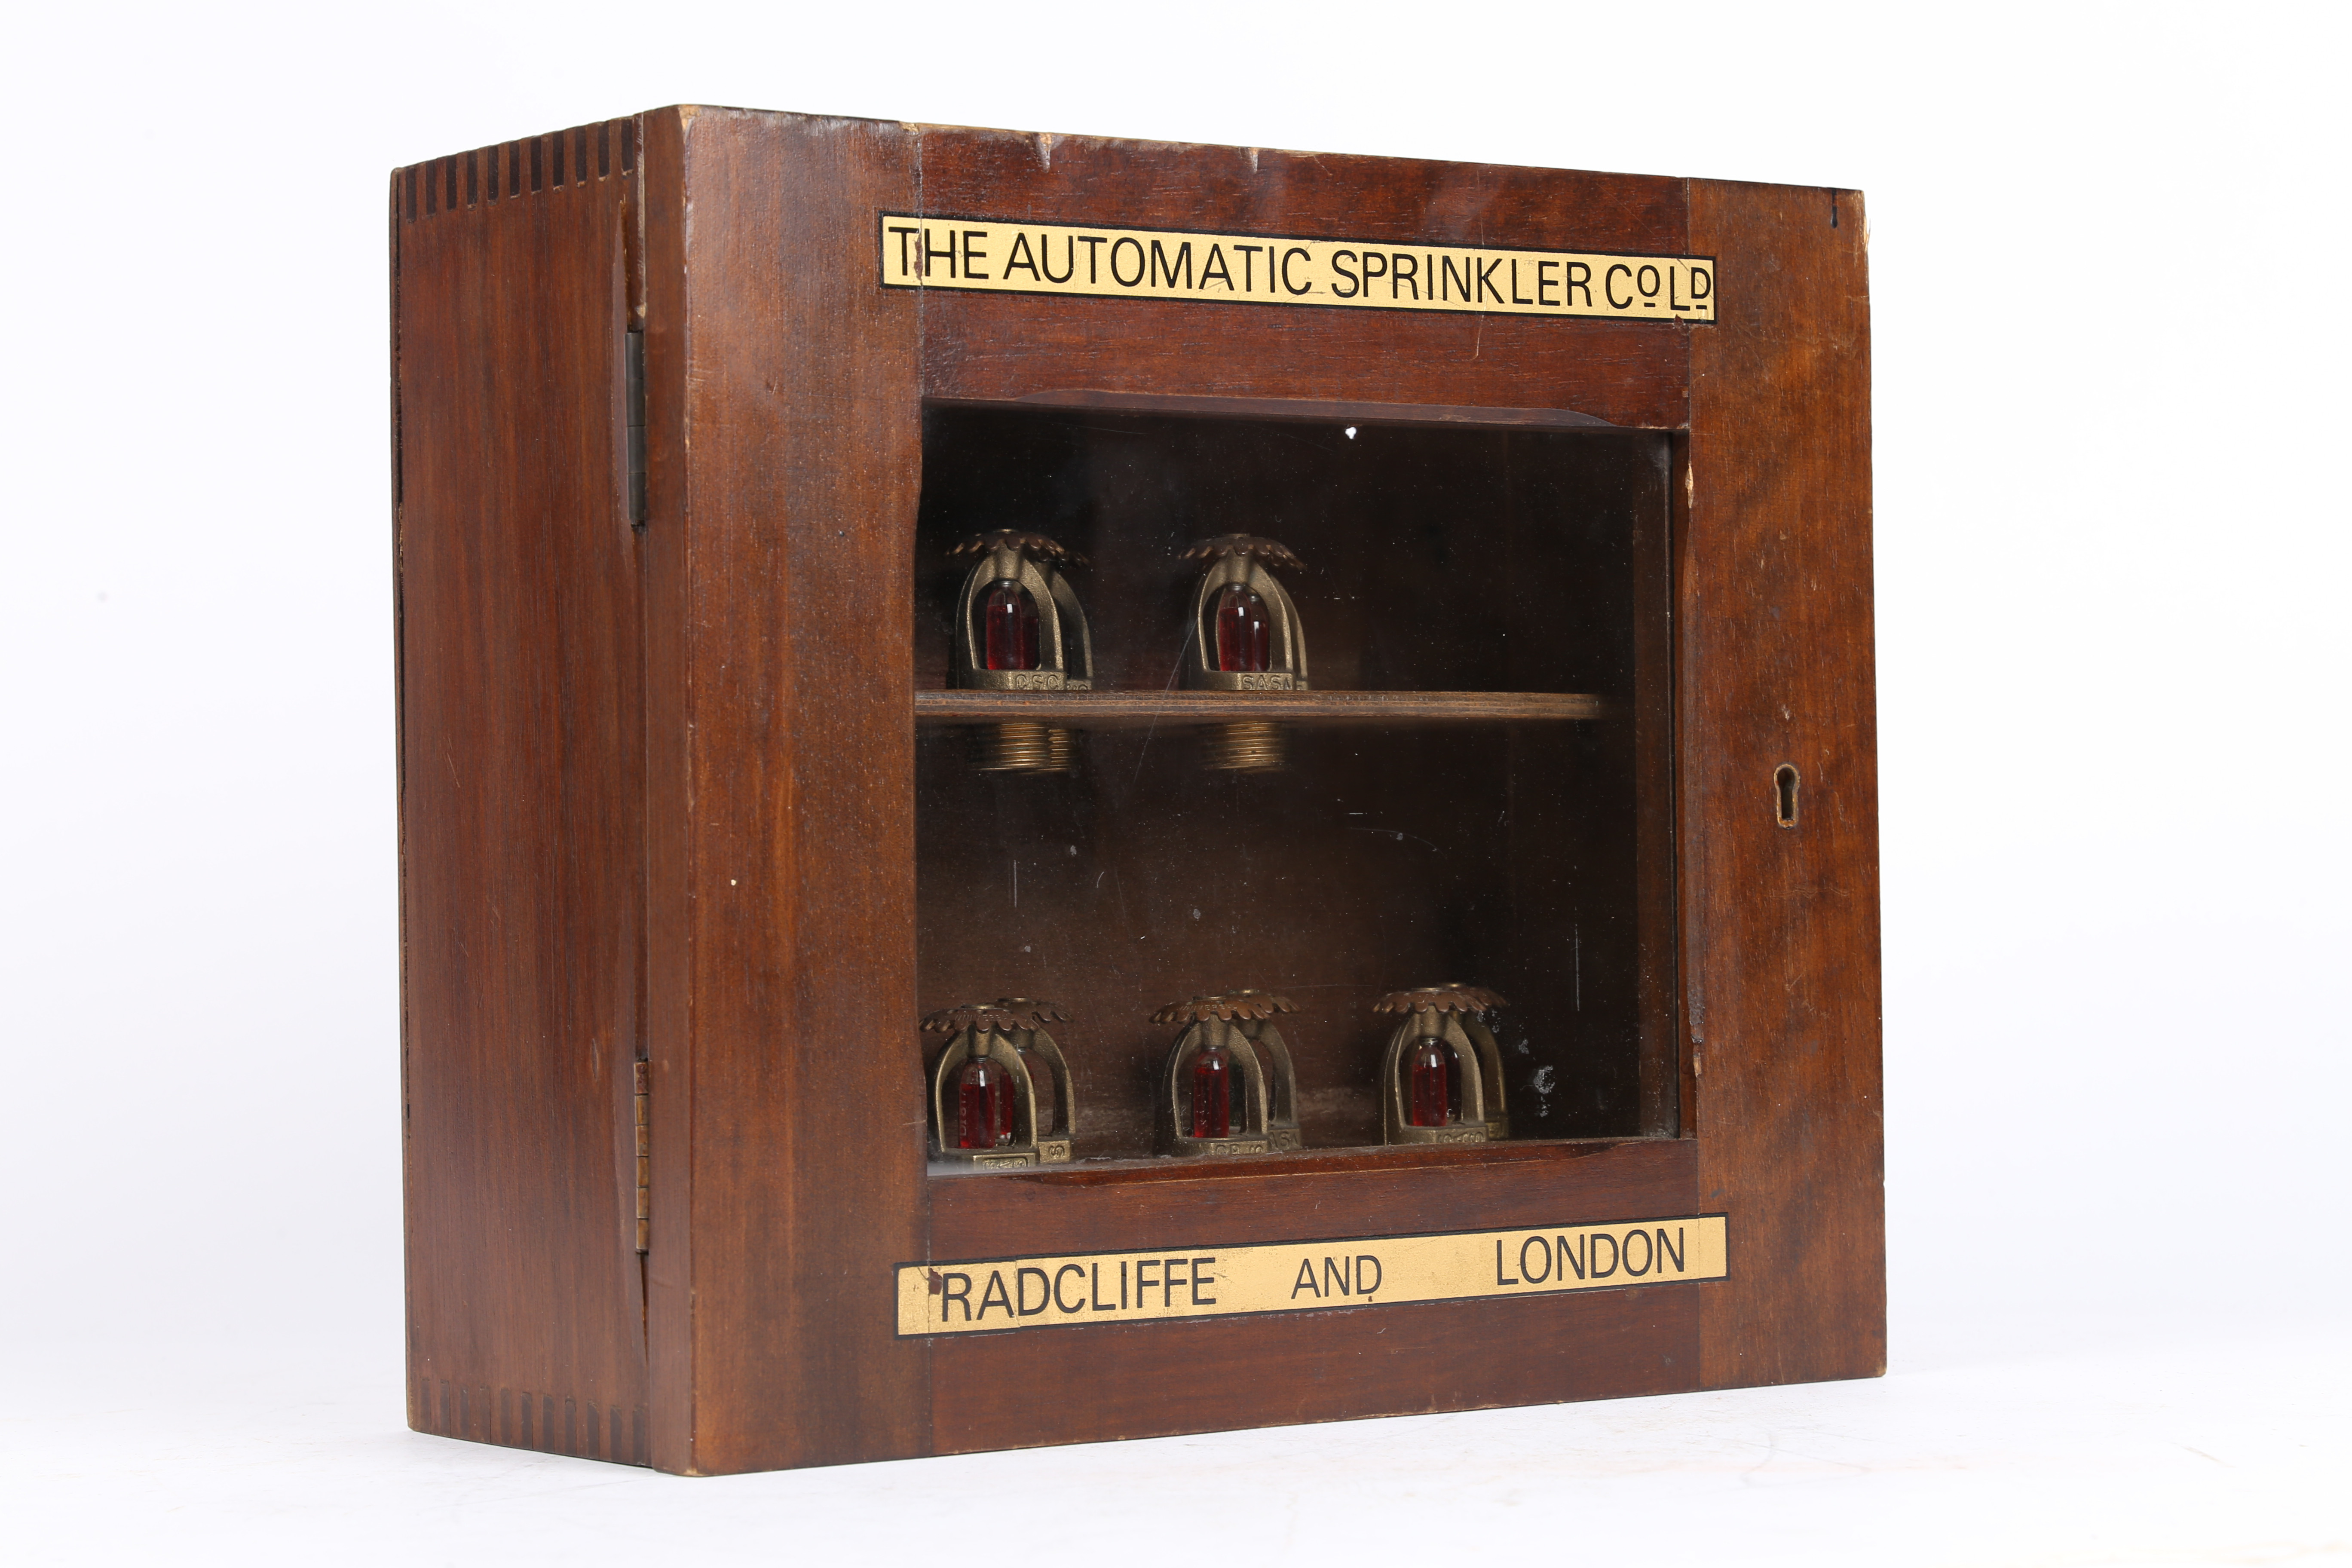 THE AUTOMATIC SPRINKLER CO. LTD., A GLASS FRONTED TRADE DISPLAY BOX. - Image 6 of 6